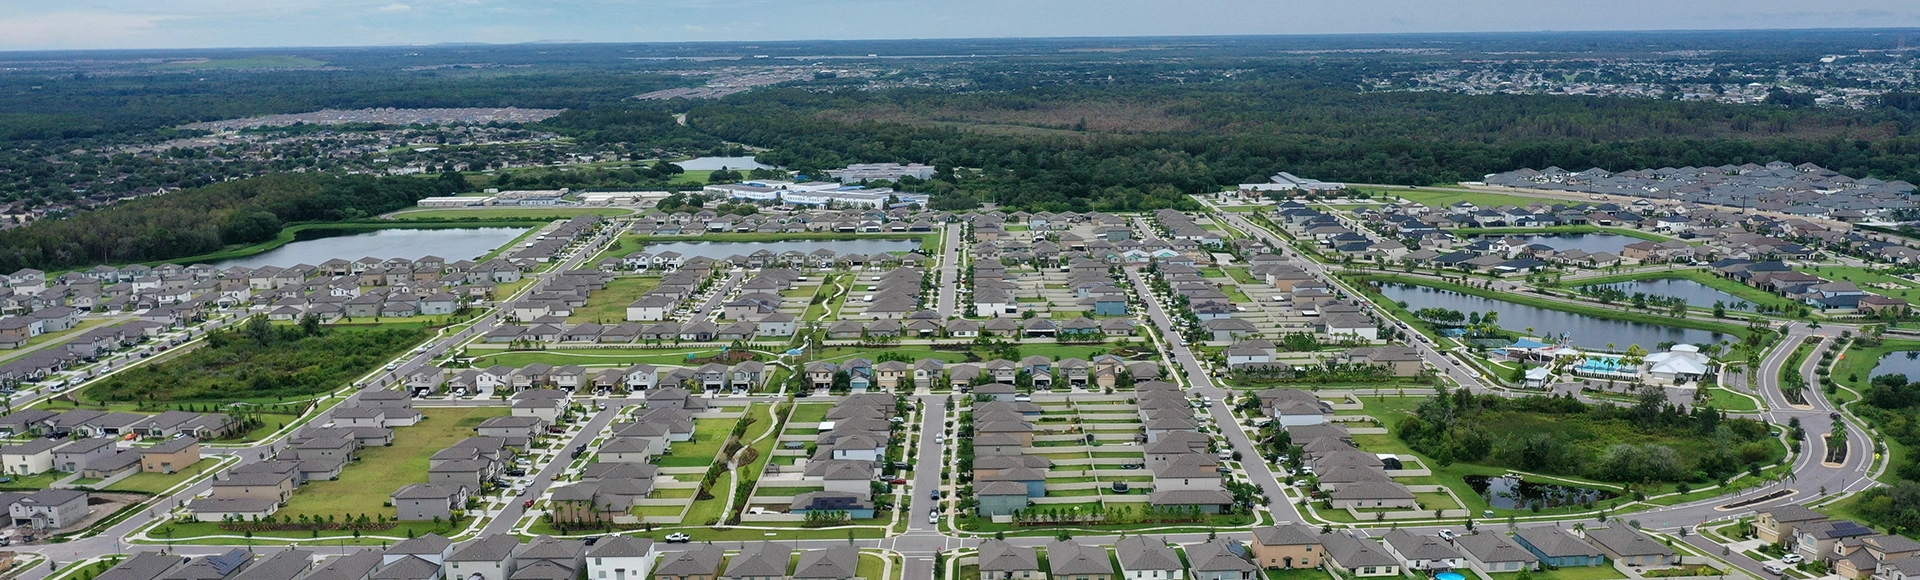 
Aerial view of a suburb in Austin, Texas with trees and a cloudy sky in the background.